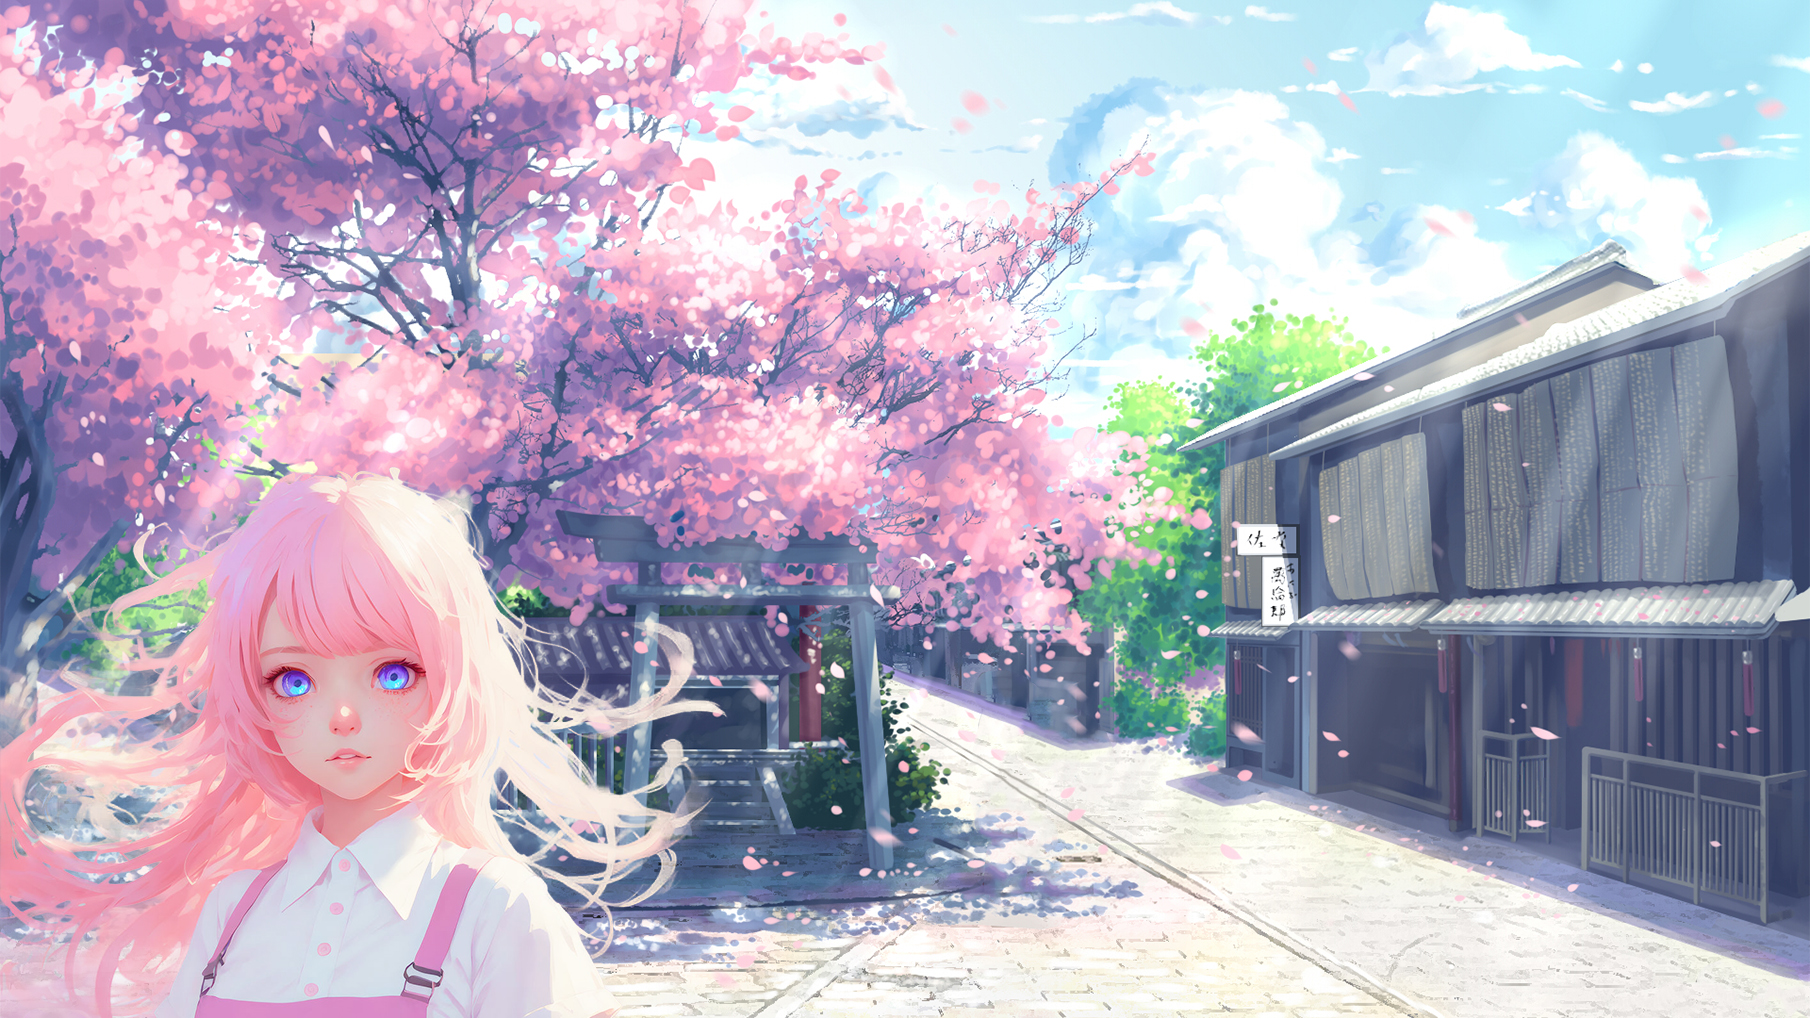 Anime Girls Anime Edit Cherry Blossom Petals Pink Hair Blue Eyes White Shirt Clouds Trees Looking At 1810x1018